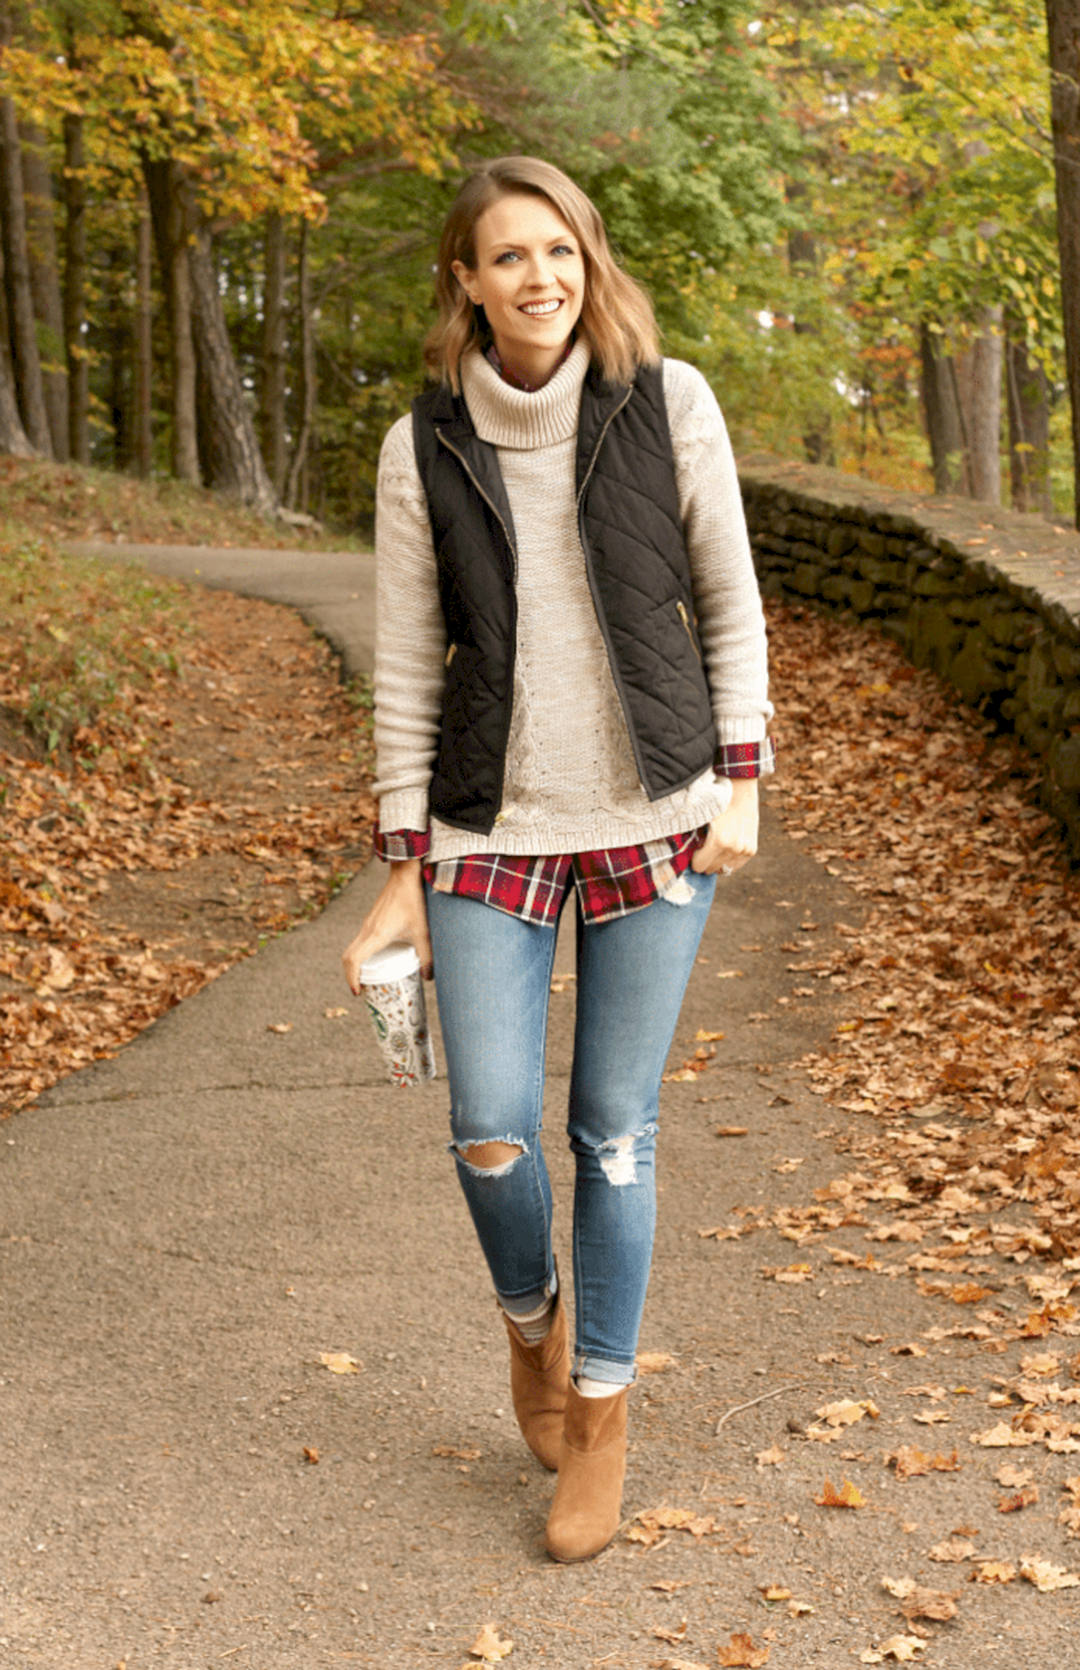 Classic and comfortable preppy look from bmodish